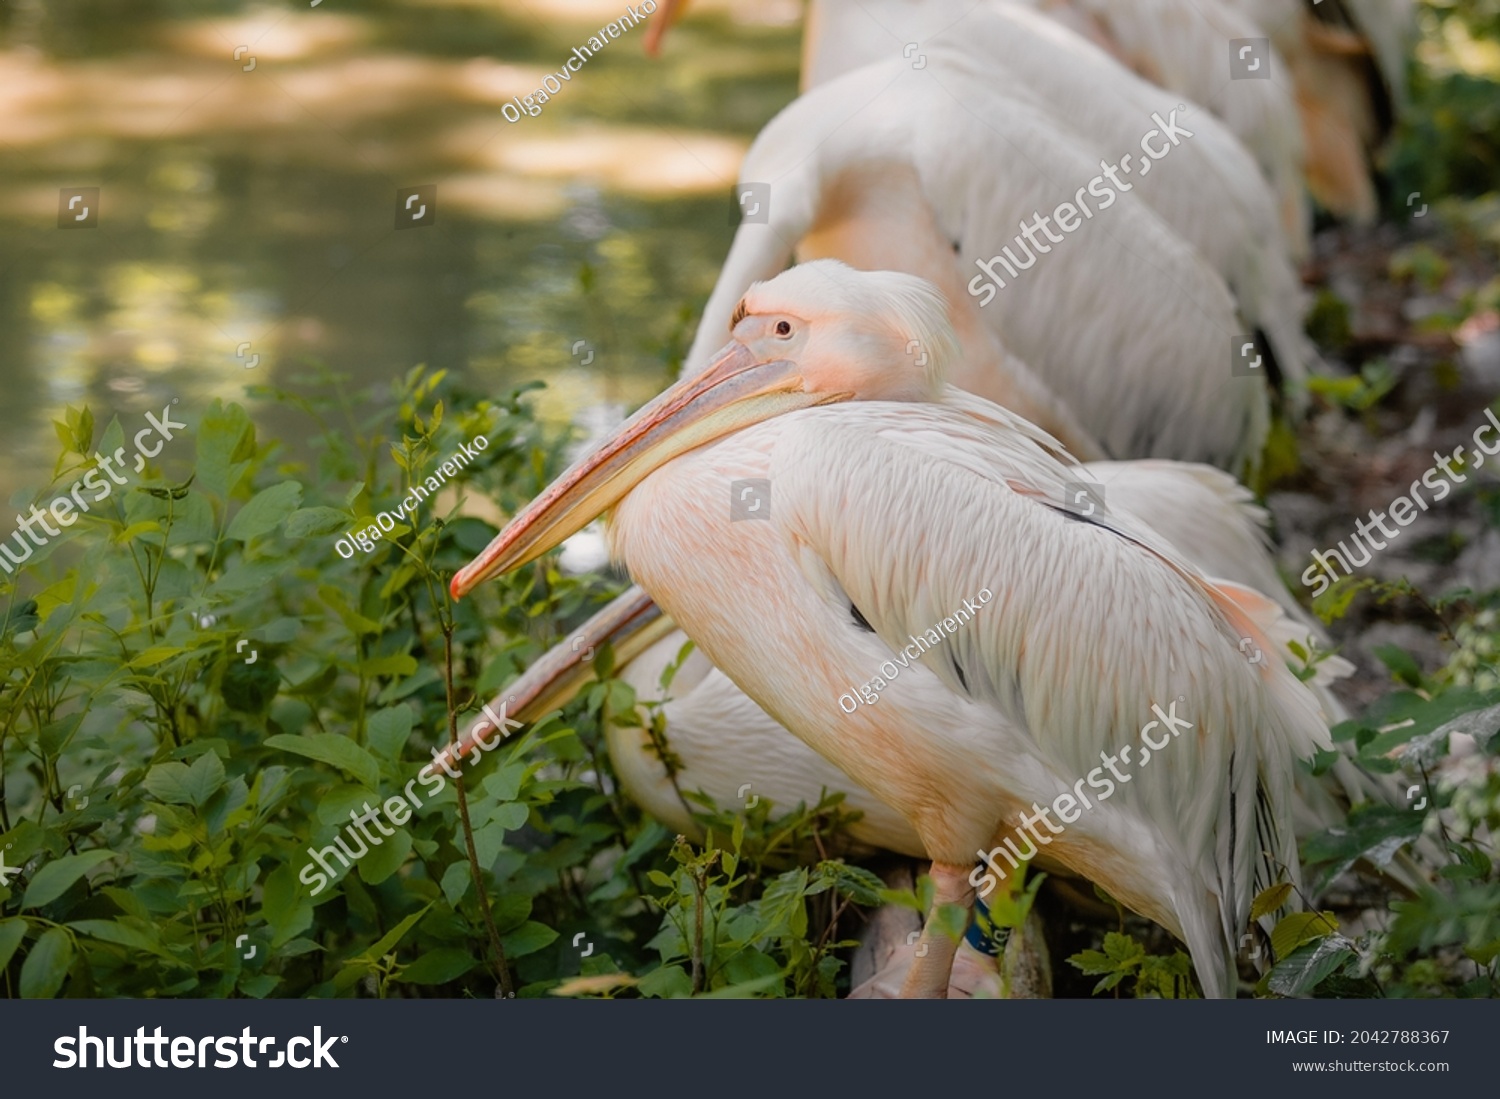 The great white pelican (Pelecanus onocrotalus) aka the eastern white pelican, rosy pelican or white pelican. Wild birds in nature. The inhabitants of the zoo. Birdwatching. #2042788367